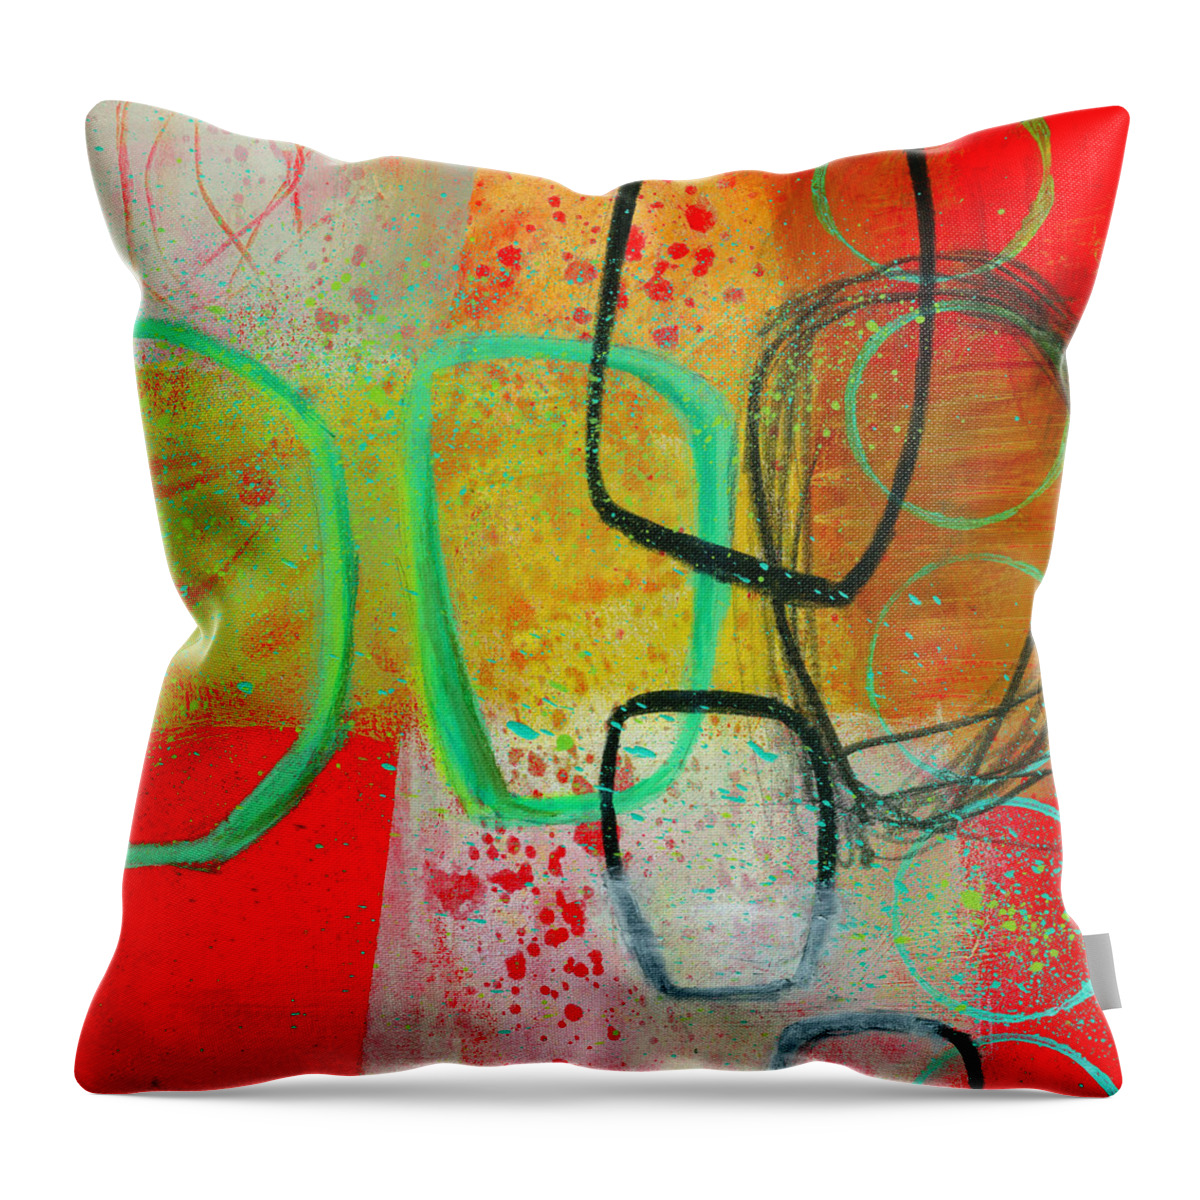 8�x8� Throw Pillow featuring the painting Fresh Paint #3 by Jane Davies